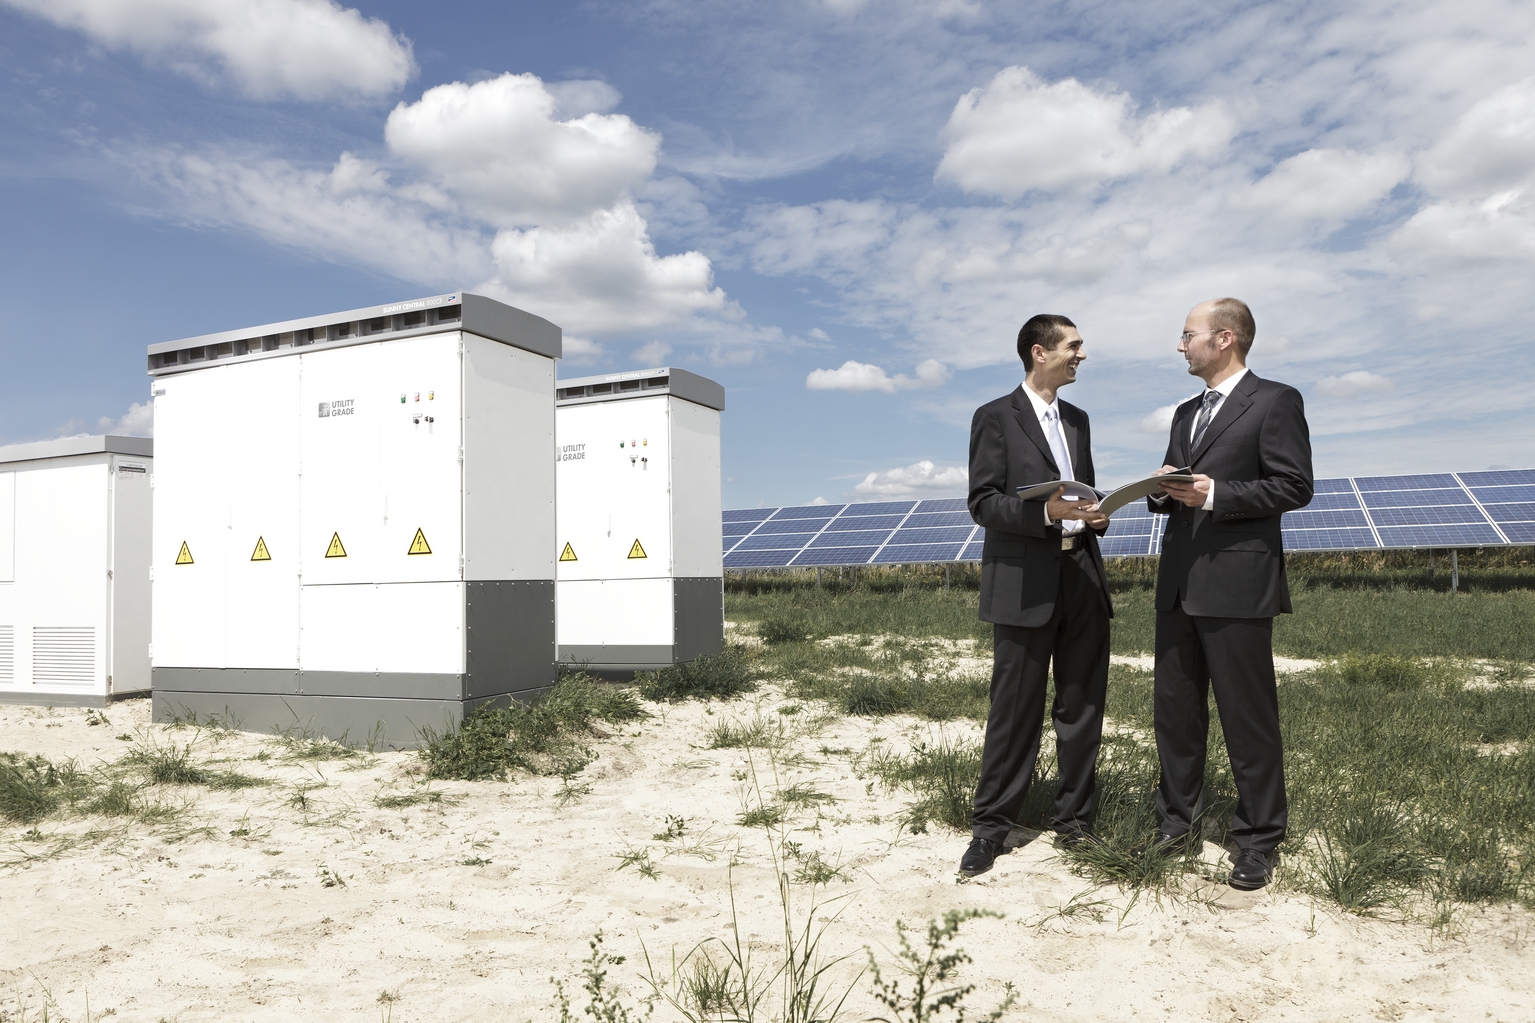 With 30 years of experience, SMA continues to be the global solar inverter manufacturer